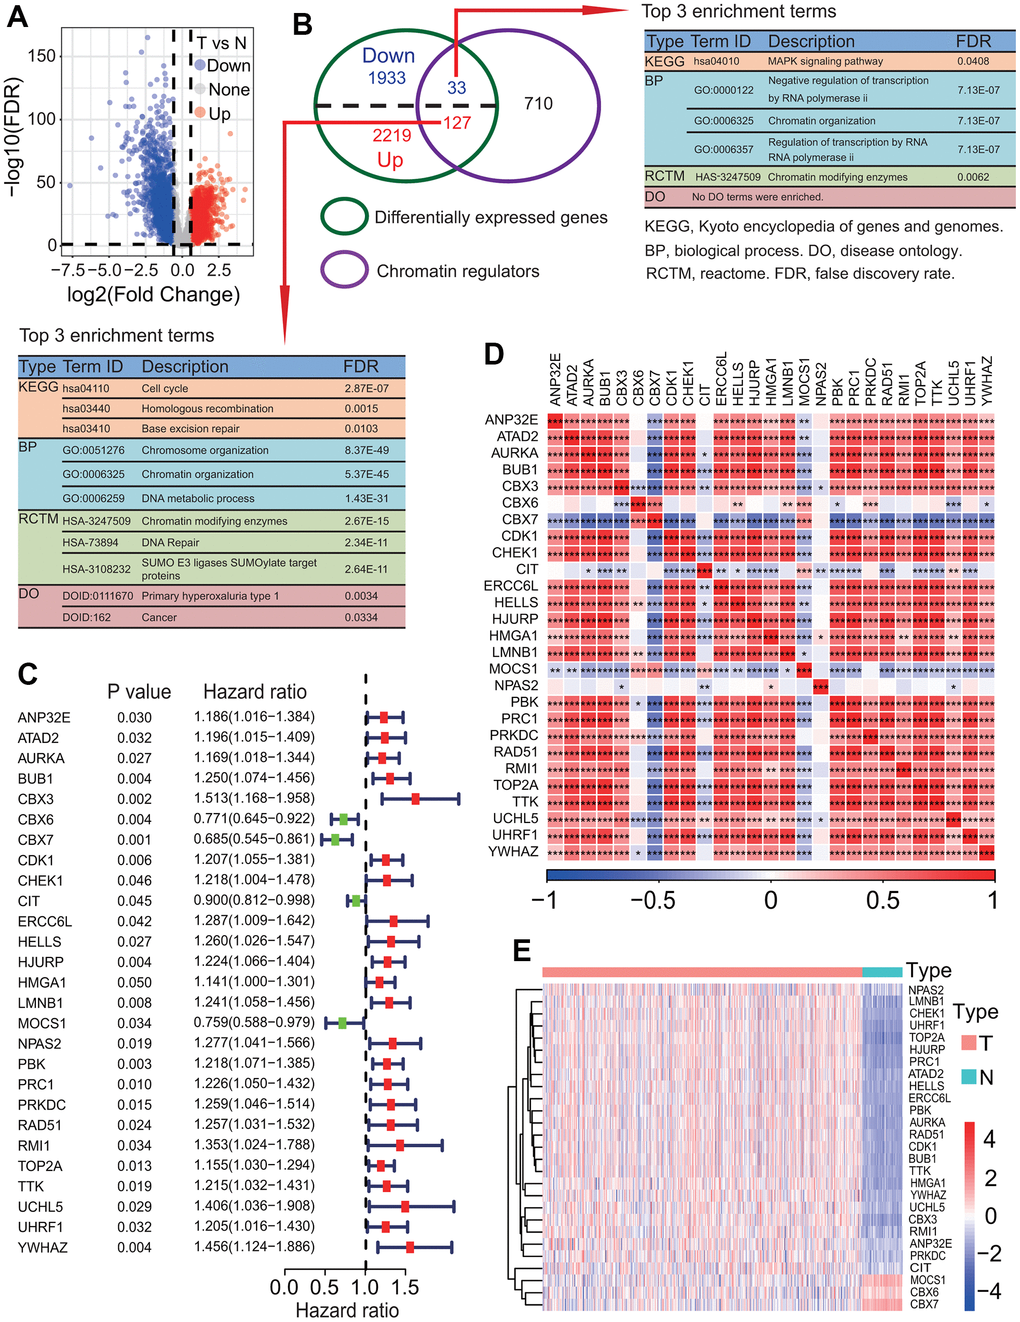 Identification of key differentially expressed chromatin regulators associated with survival. (A) Distribution of differentially expressed genes (DEGs) between lung adenocarcinoma (LUAD) and normal lung tissues. Totals of 2346 upregulated and 1966 downregulated DEGs were identified in LUAD tissue. (B) Identification of differentially expressed chromatin regulators (DECRs). Totals of 127 upregulated and 33 downregulated DECRs were identified in LUAD tissue. (C) Identification of key DECRs associated with overall survival (OS) rate of patients with LUAD. Univariate Cox regression analysis showed that 27 DECRs were associated with the OS of patients with LUAD. (D) Correlations between key prognostic DECRs in expression. Except three DECRs including MOCS1, CBX7 and CIT, the expressions of the other 24 DECRs showed strong positive correlations on the whole. (E) Heat map of key prognostic DECRs in expression. Except three DECRs including MOCS1, CBX7 and CBX6, the expression of the other 24 DECRs were upregulated in LUAD tissue.